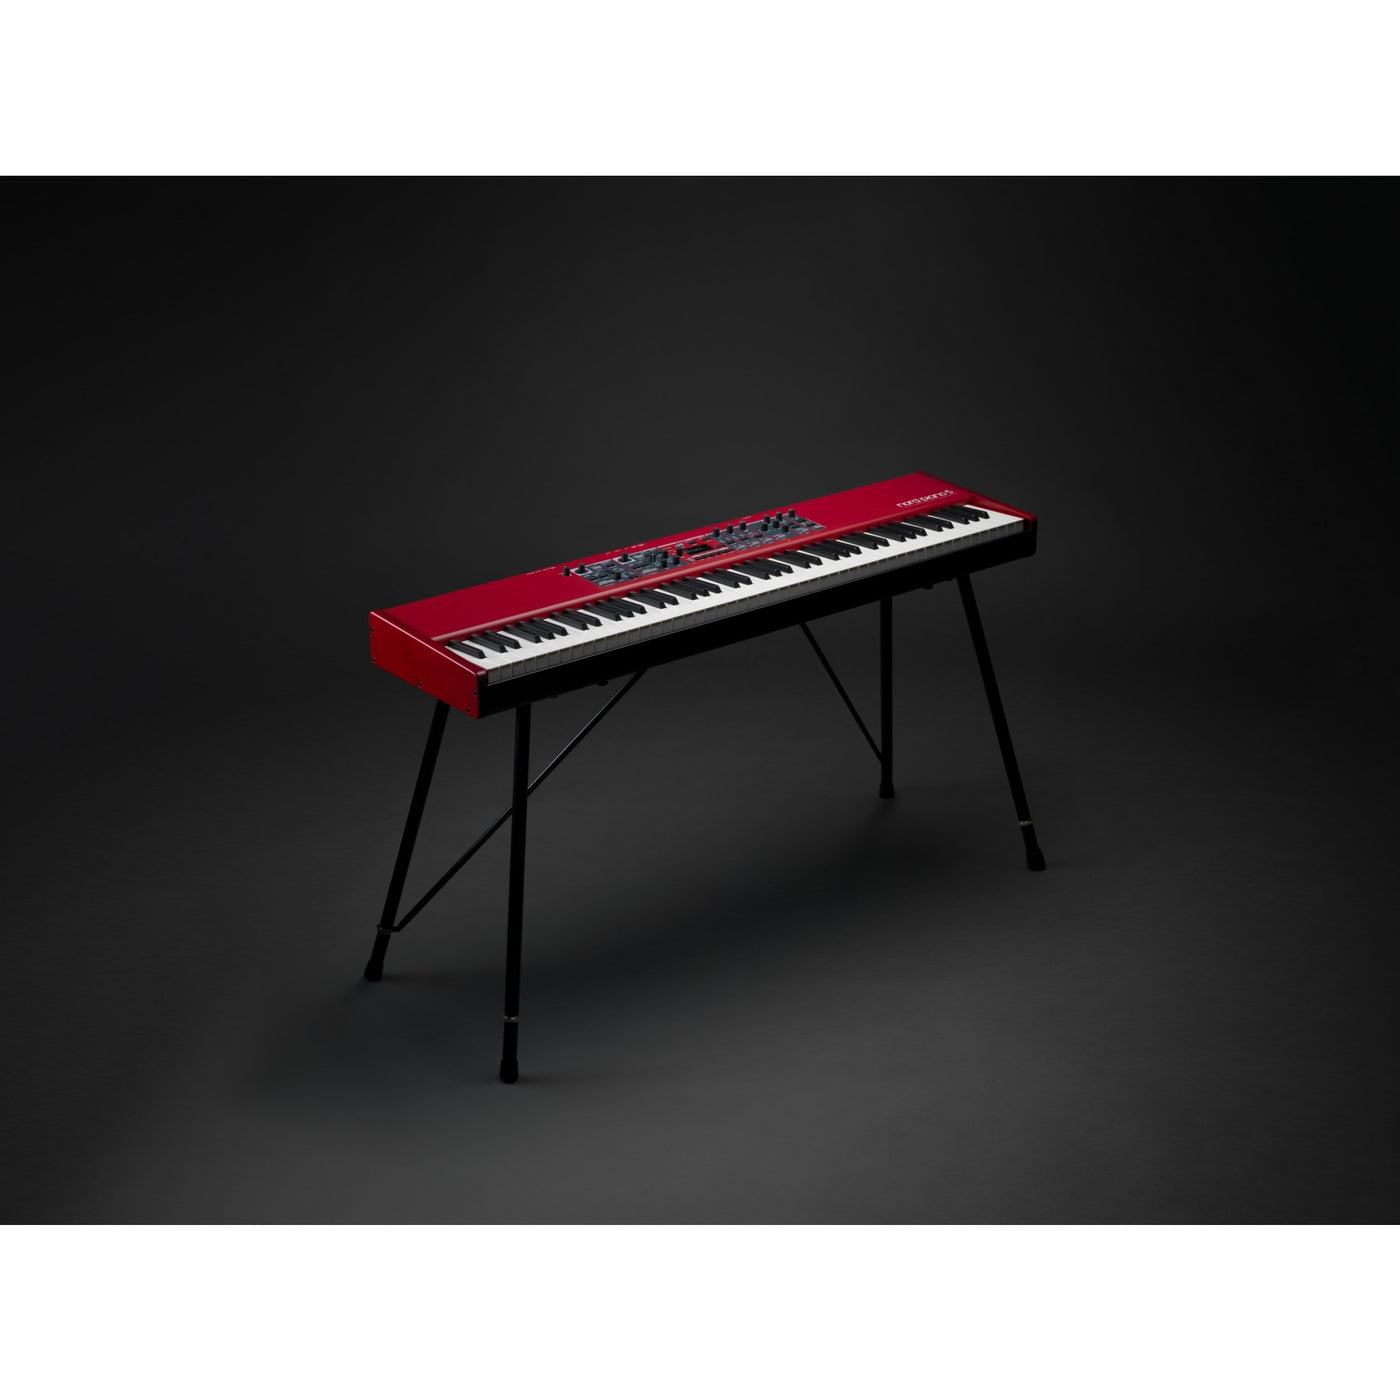 Nord Piano 5 88-Key Stage Piano